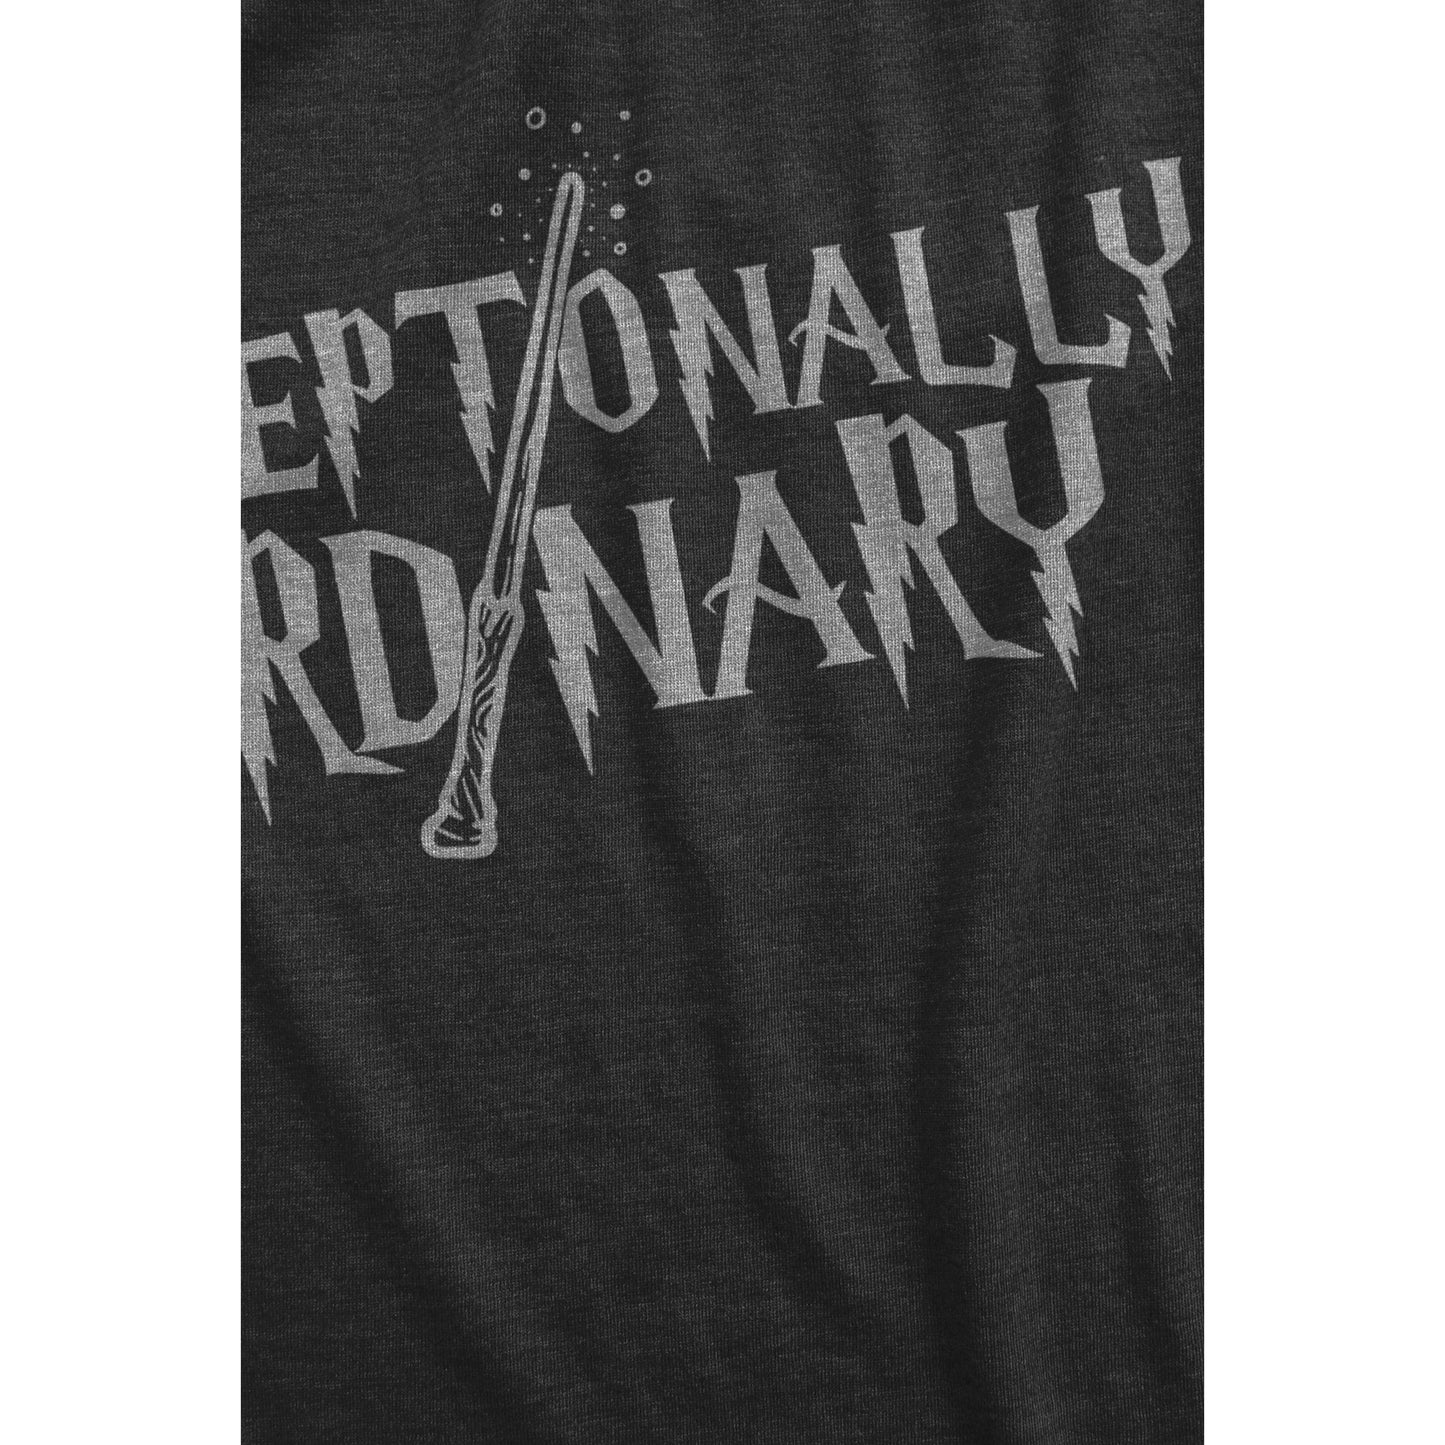 Exceptionally Ordinary (Harry Potter) - threadtank | stories you can wear